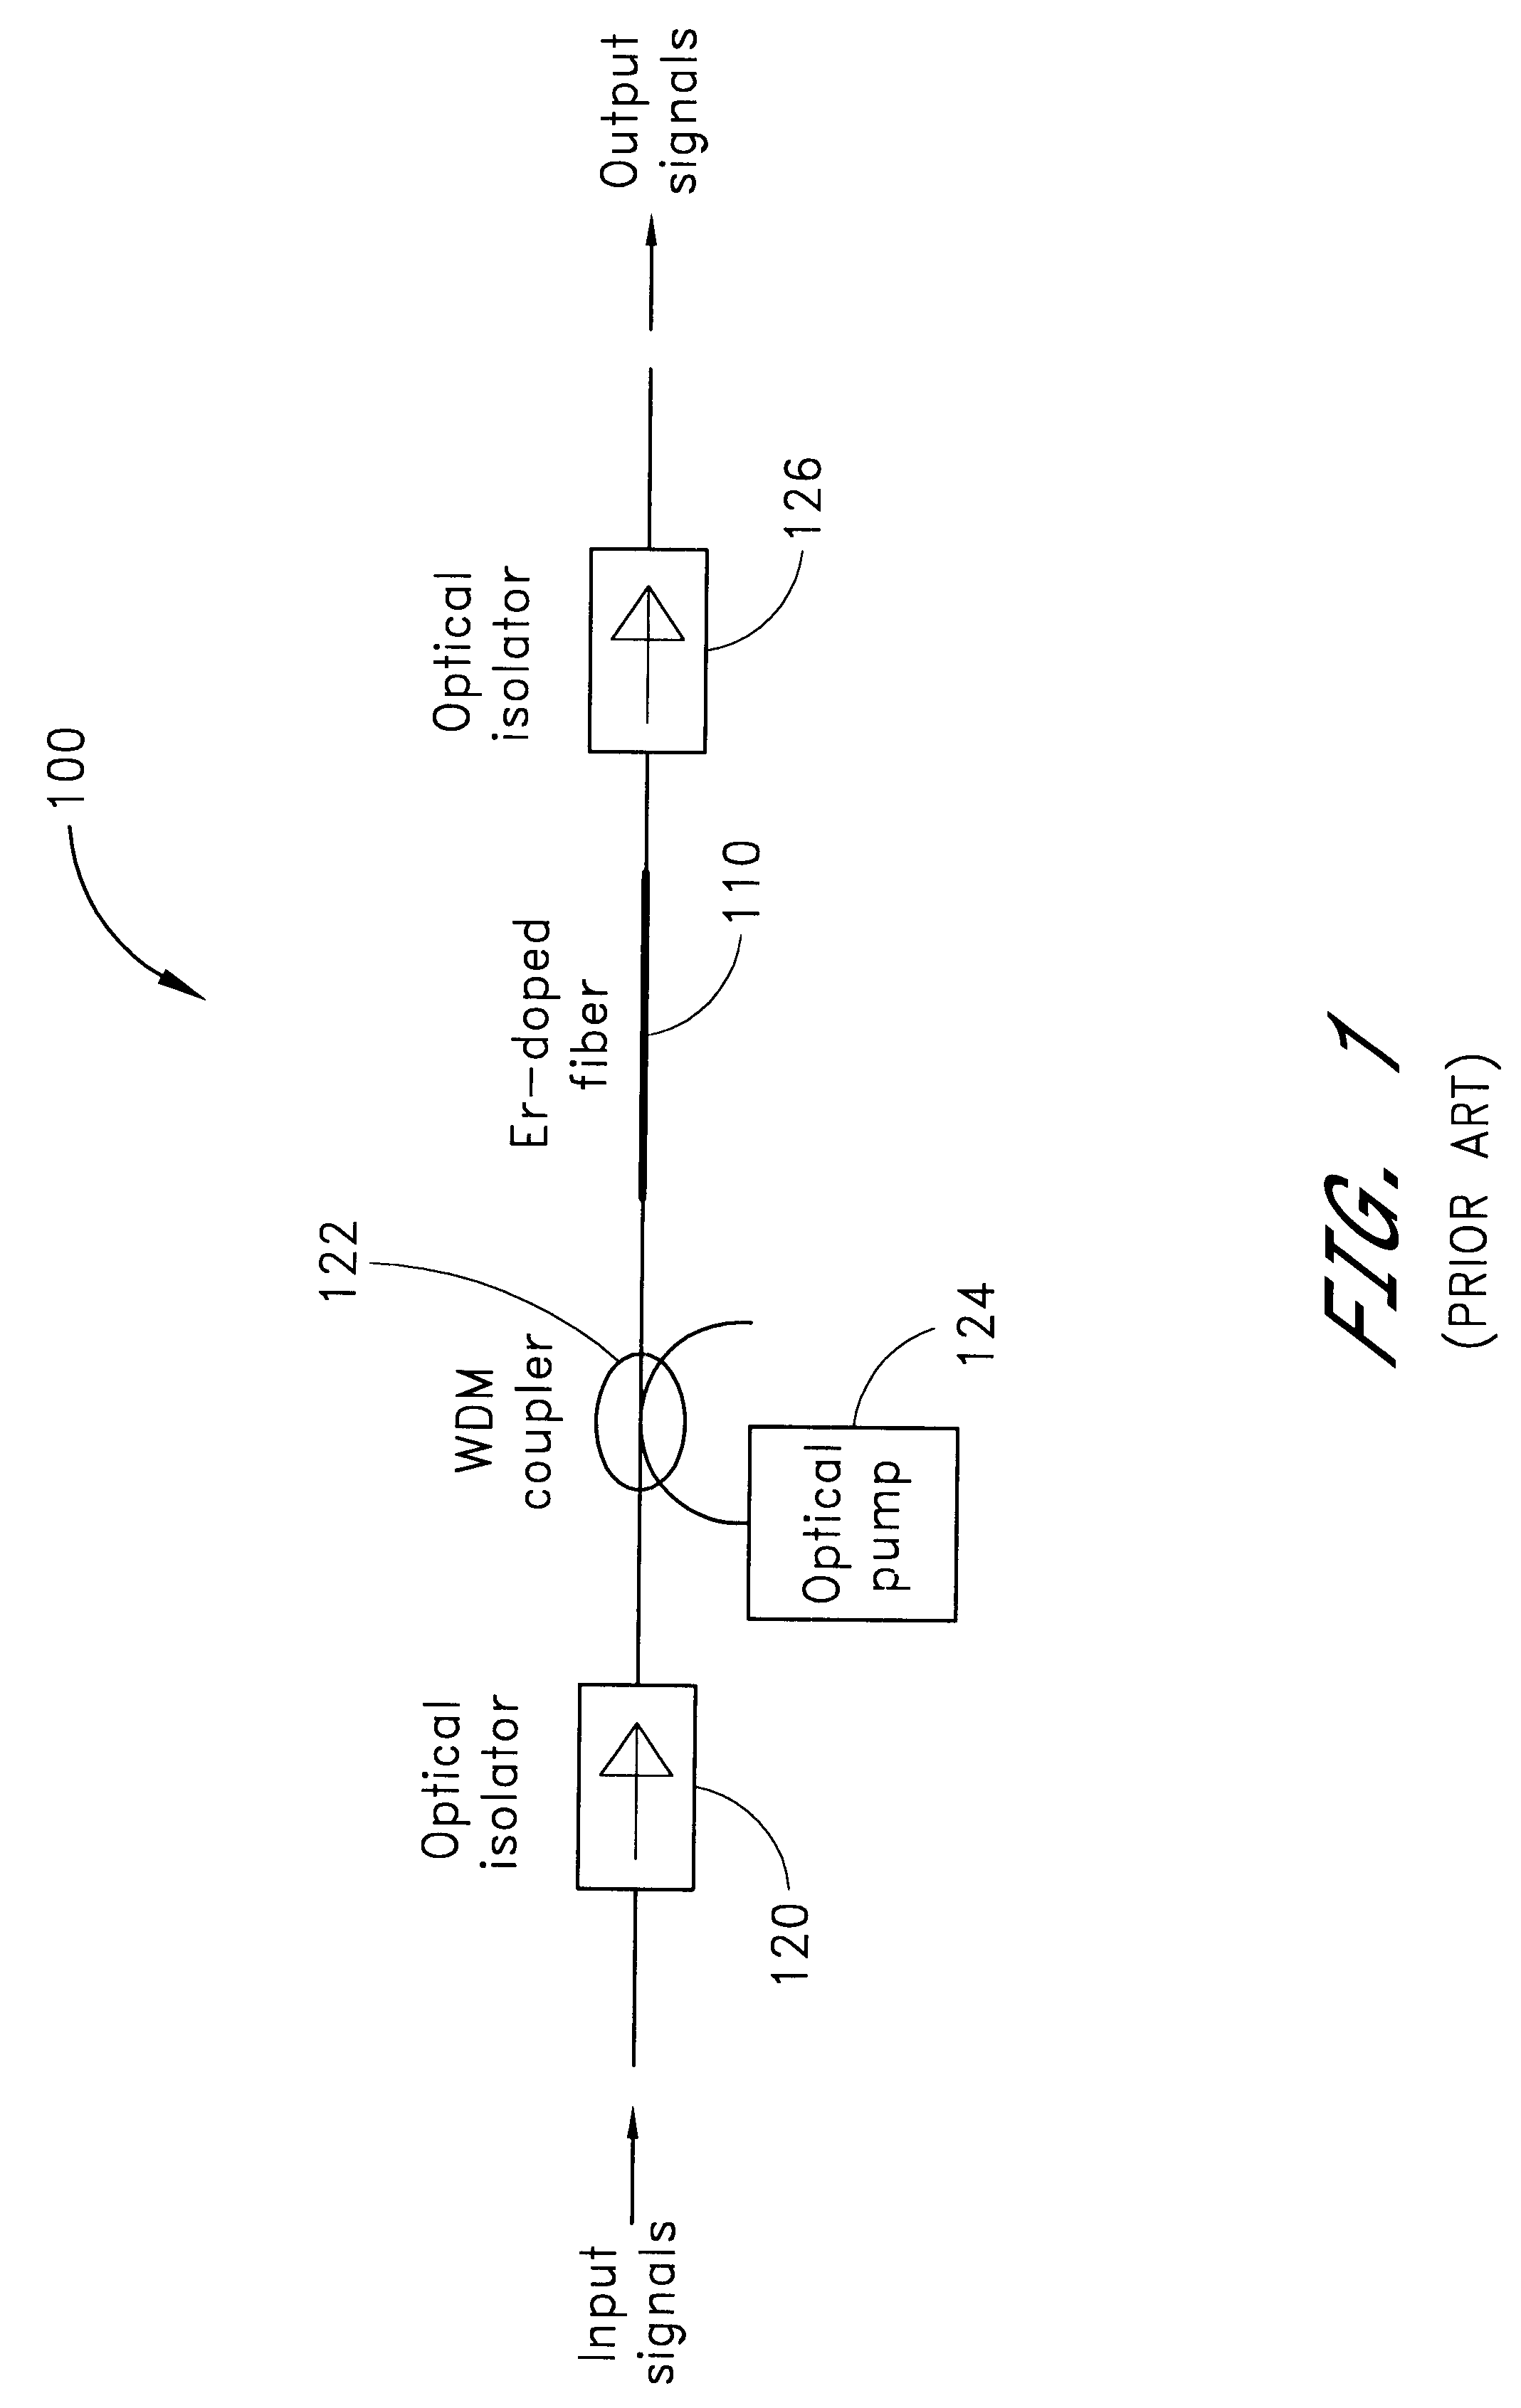 Method of amplifying optical signals using doped materials with extremely broad bandwidths